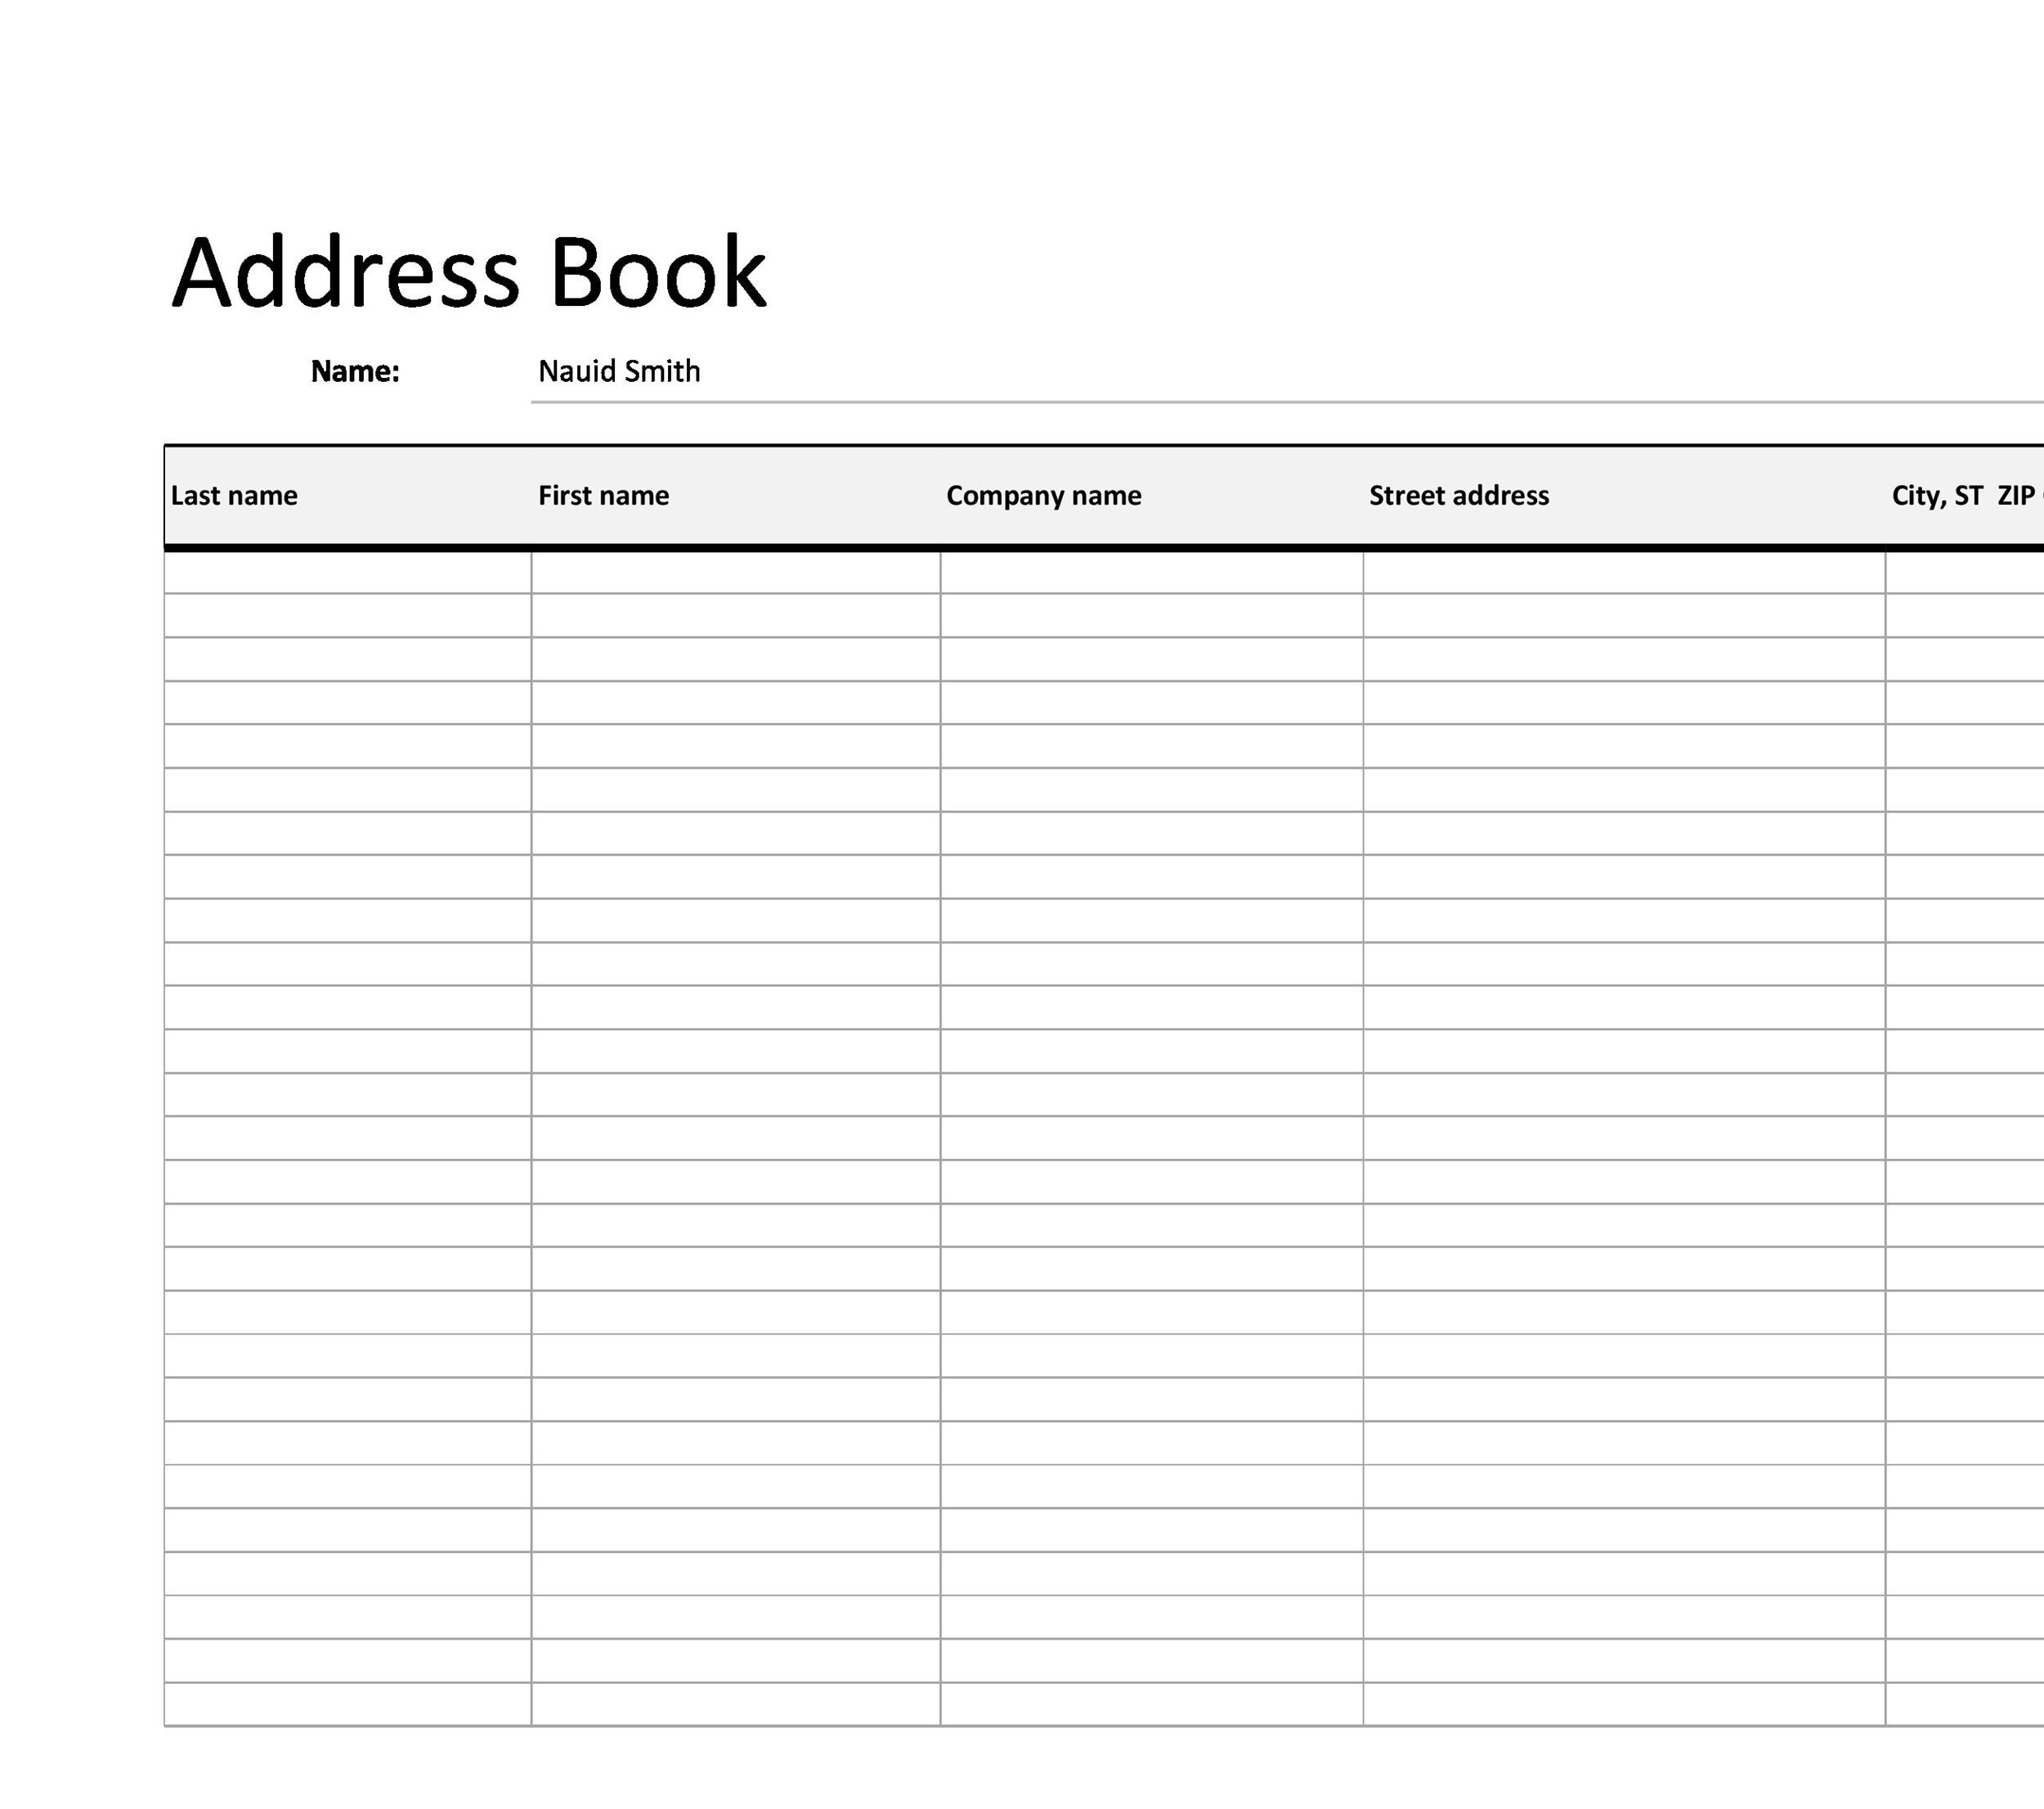 address books with alphabet index Address Book: address book for names, addresses, phone numbers,Email Addresses,Anniversary, emails and birthdays Alphabetical Organizer Journal ... Series 